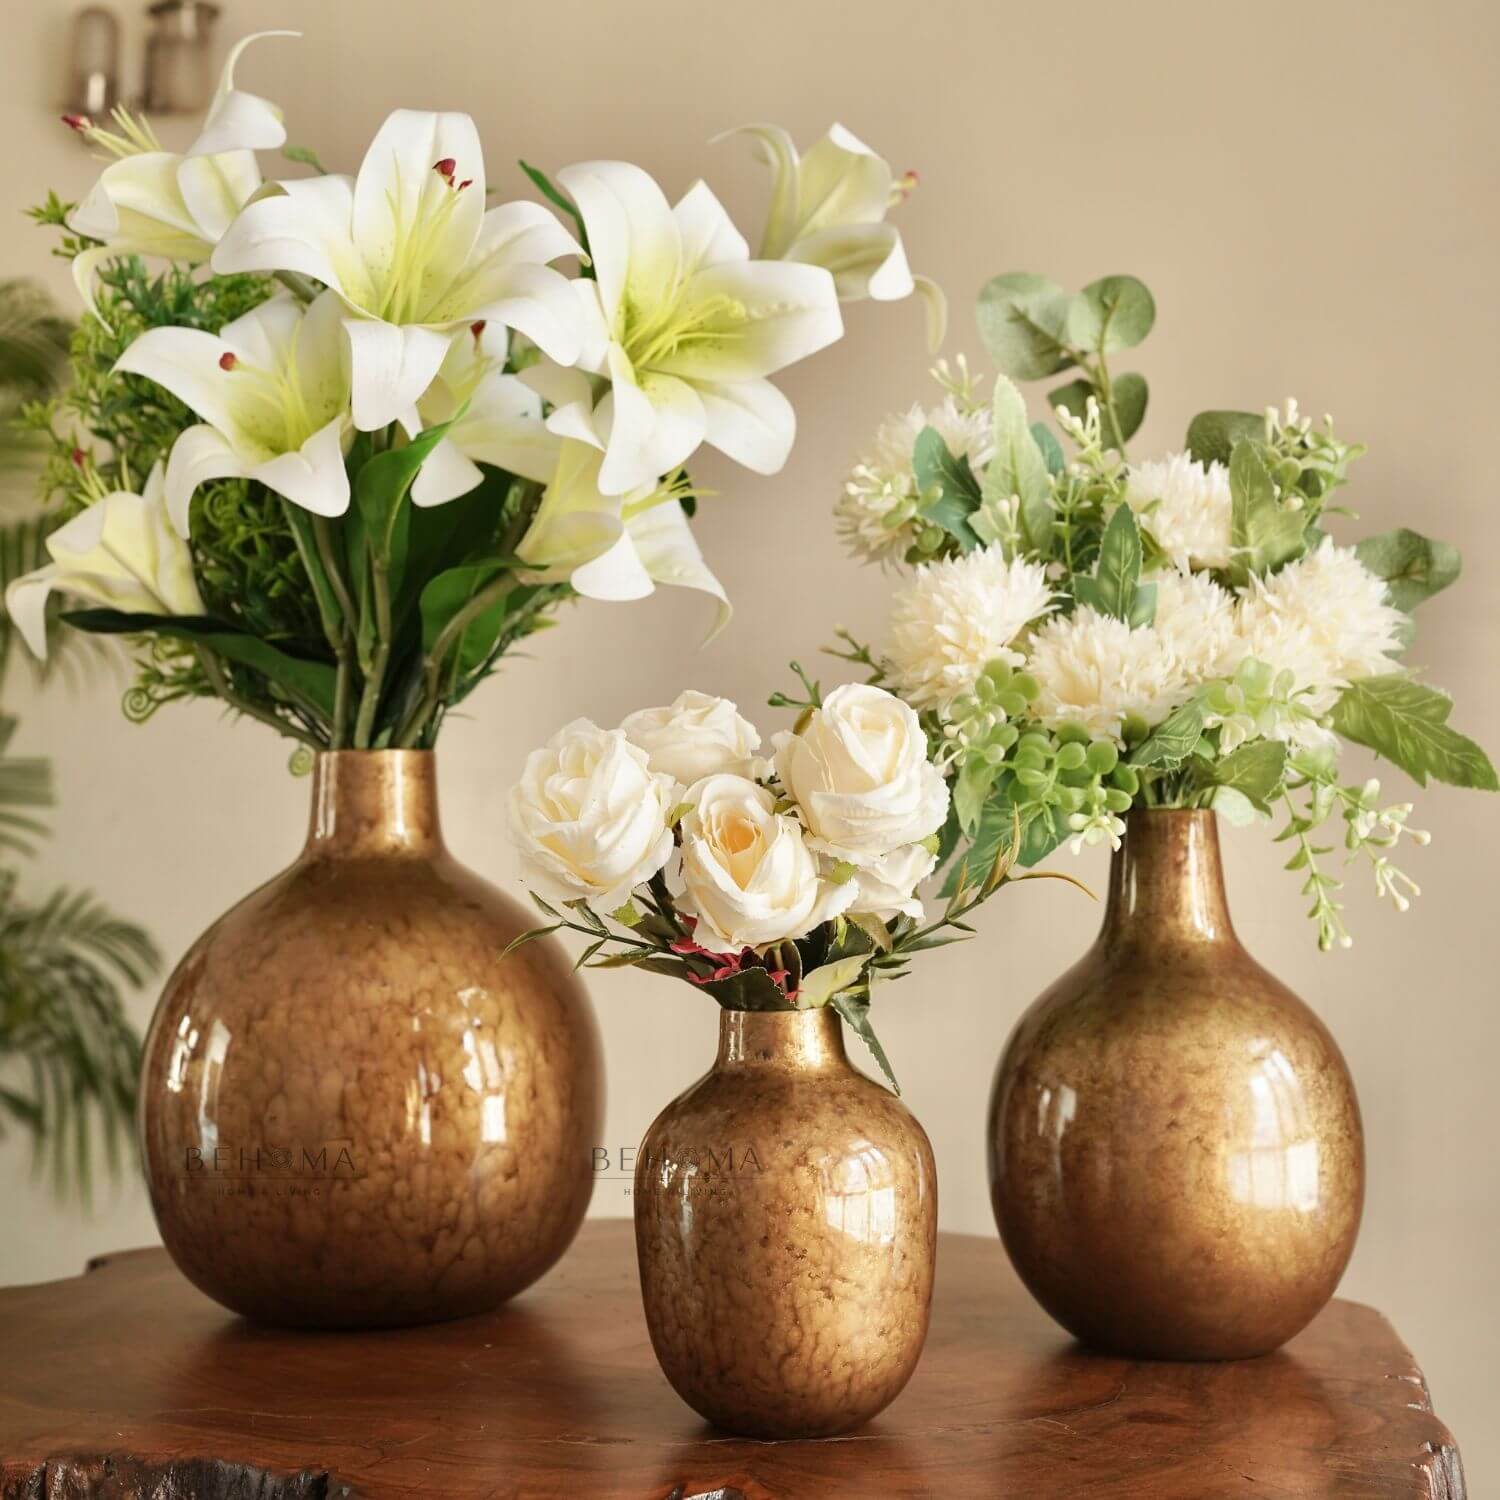 Flower vase with flowers - Set of 3 